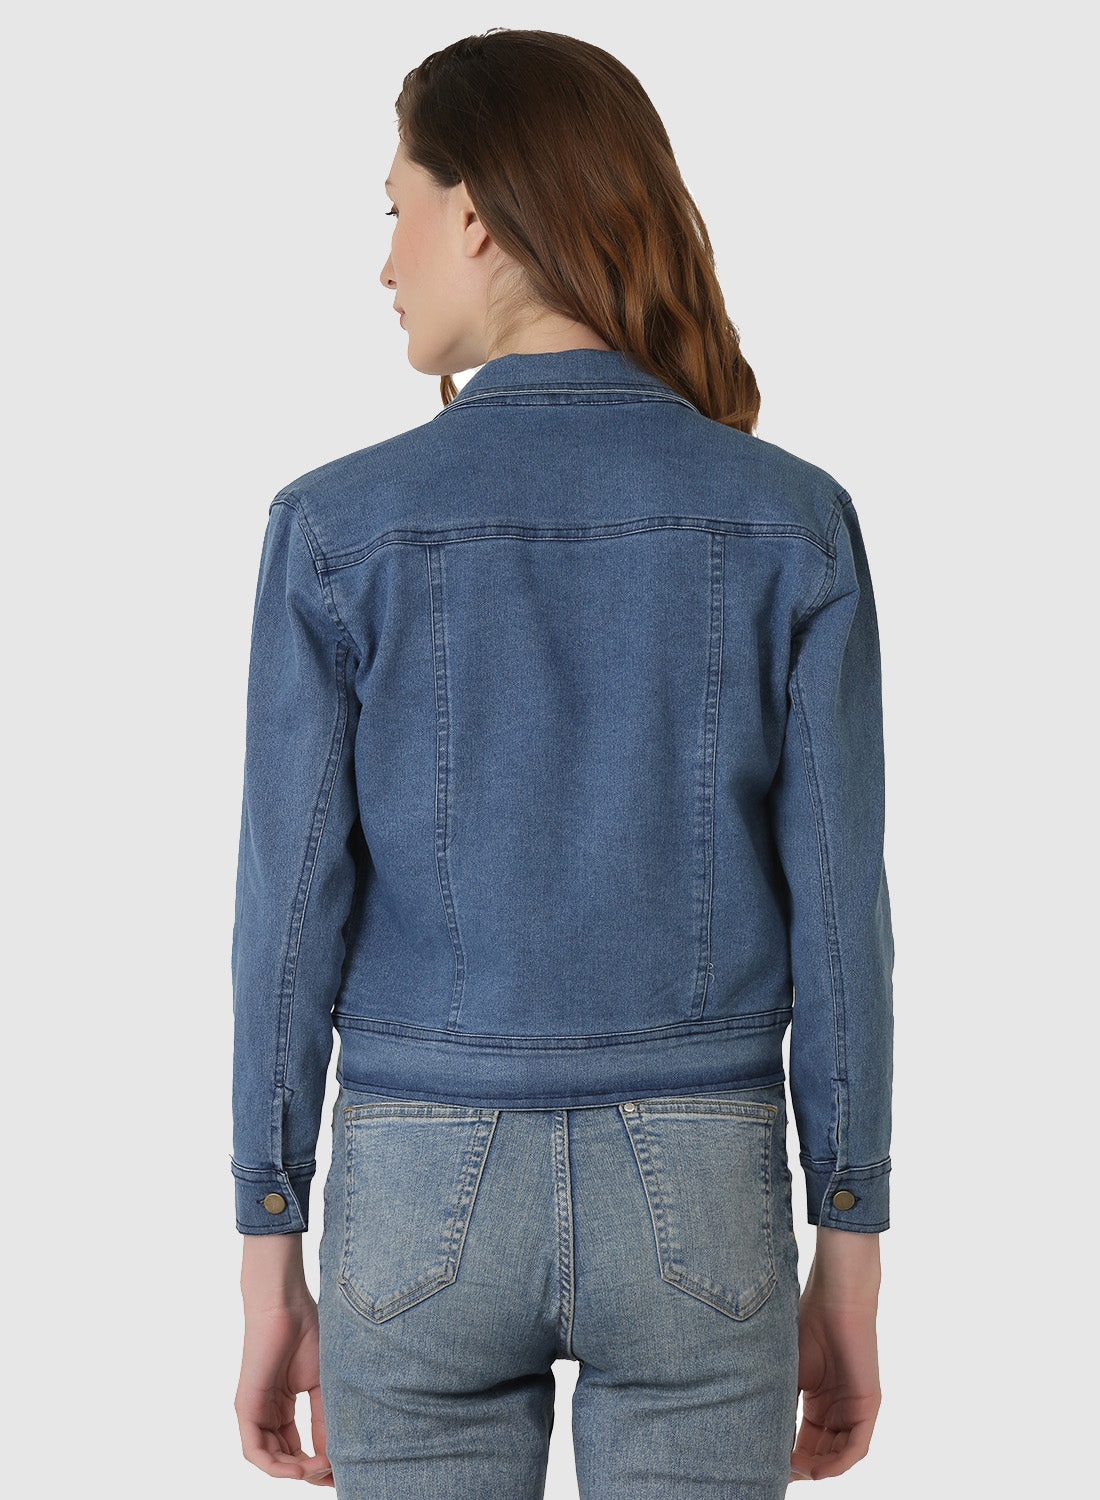 Discover more than 89 cheap ladies denim jacket best